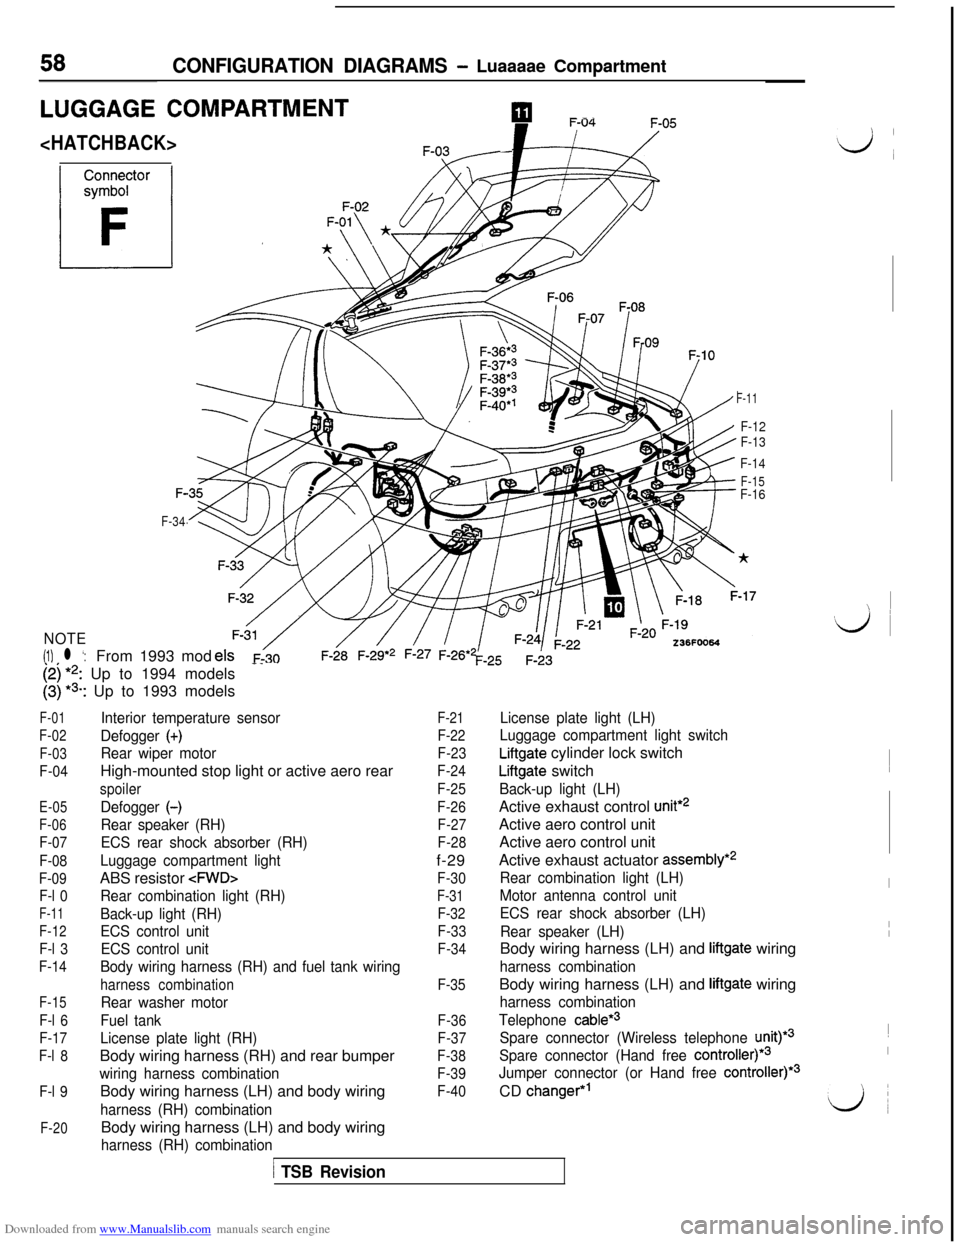 MITSUBISHI 3000GT 1994 2.G Workshop Manual Downloaded from www.Manualslib.com manuals search engine 58CONFIGURATION DIAGRAMS - Luaaaae Compartment
LUGGAGE COMPARTMENTpIl --.
<HATCHBACK>-
F-11
F-12
F-13
F-14
F-15F-F-16
F-34
NOTE
(1) l ‘:From 